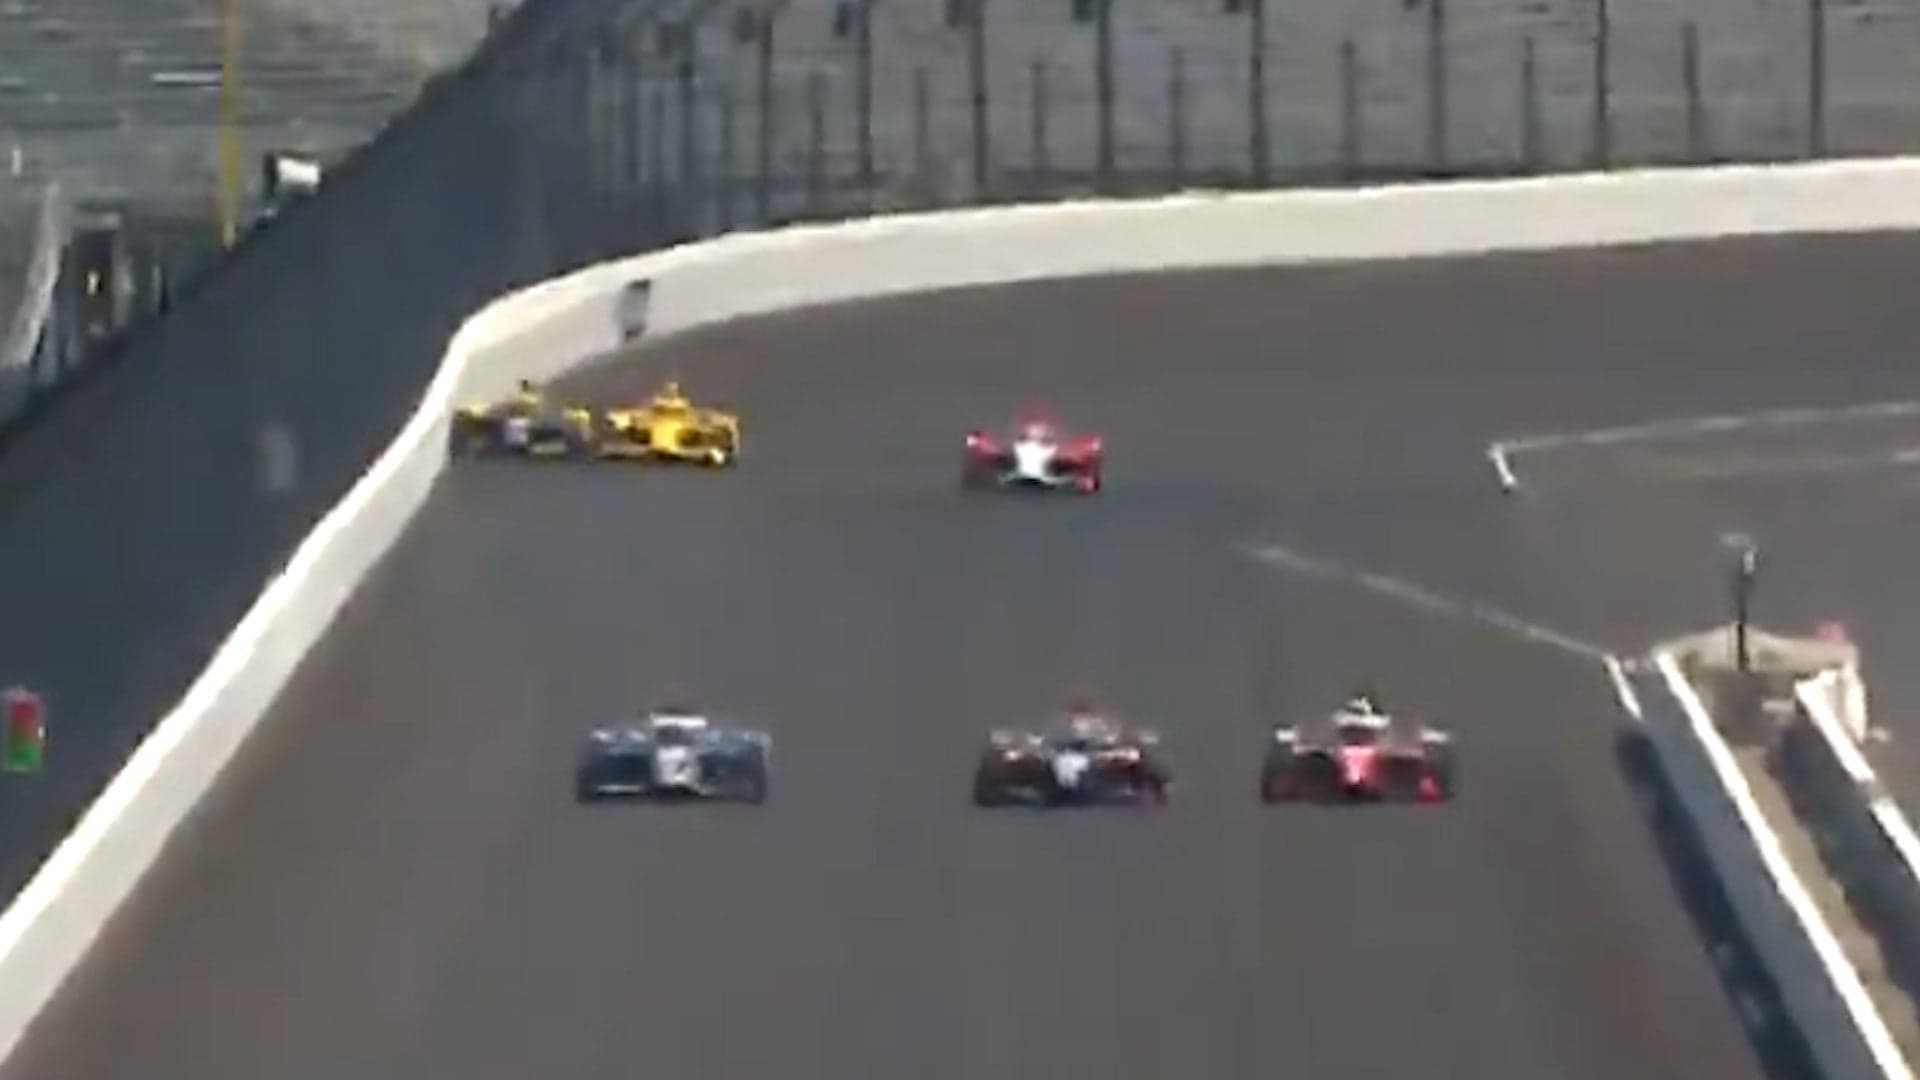 IndyCar Team Punished for ‘Idiot’ Group Photo Attempt That Caused Crash in Indy 500 Practice